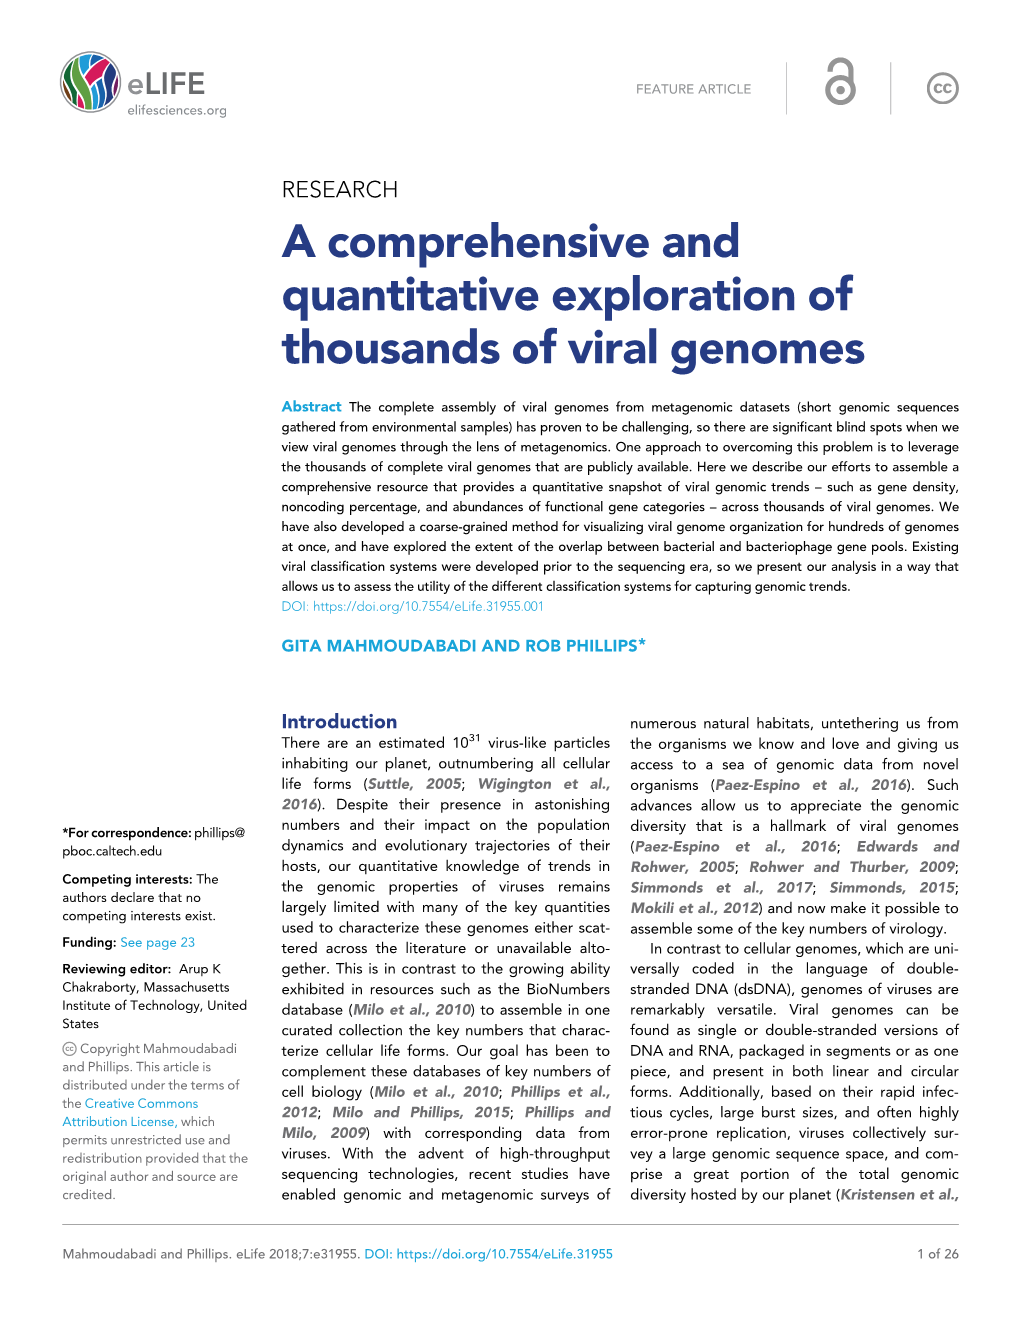 A Comprehensive and Quantitative Exploration of Thousands of Viral Genomes